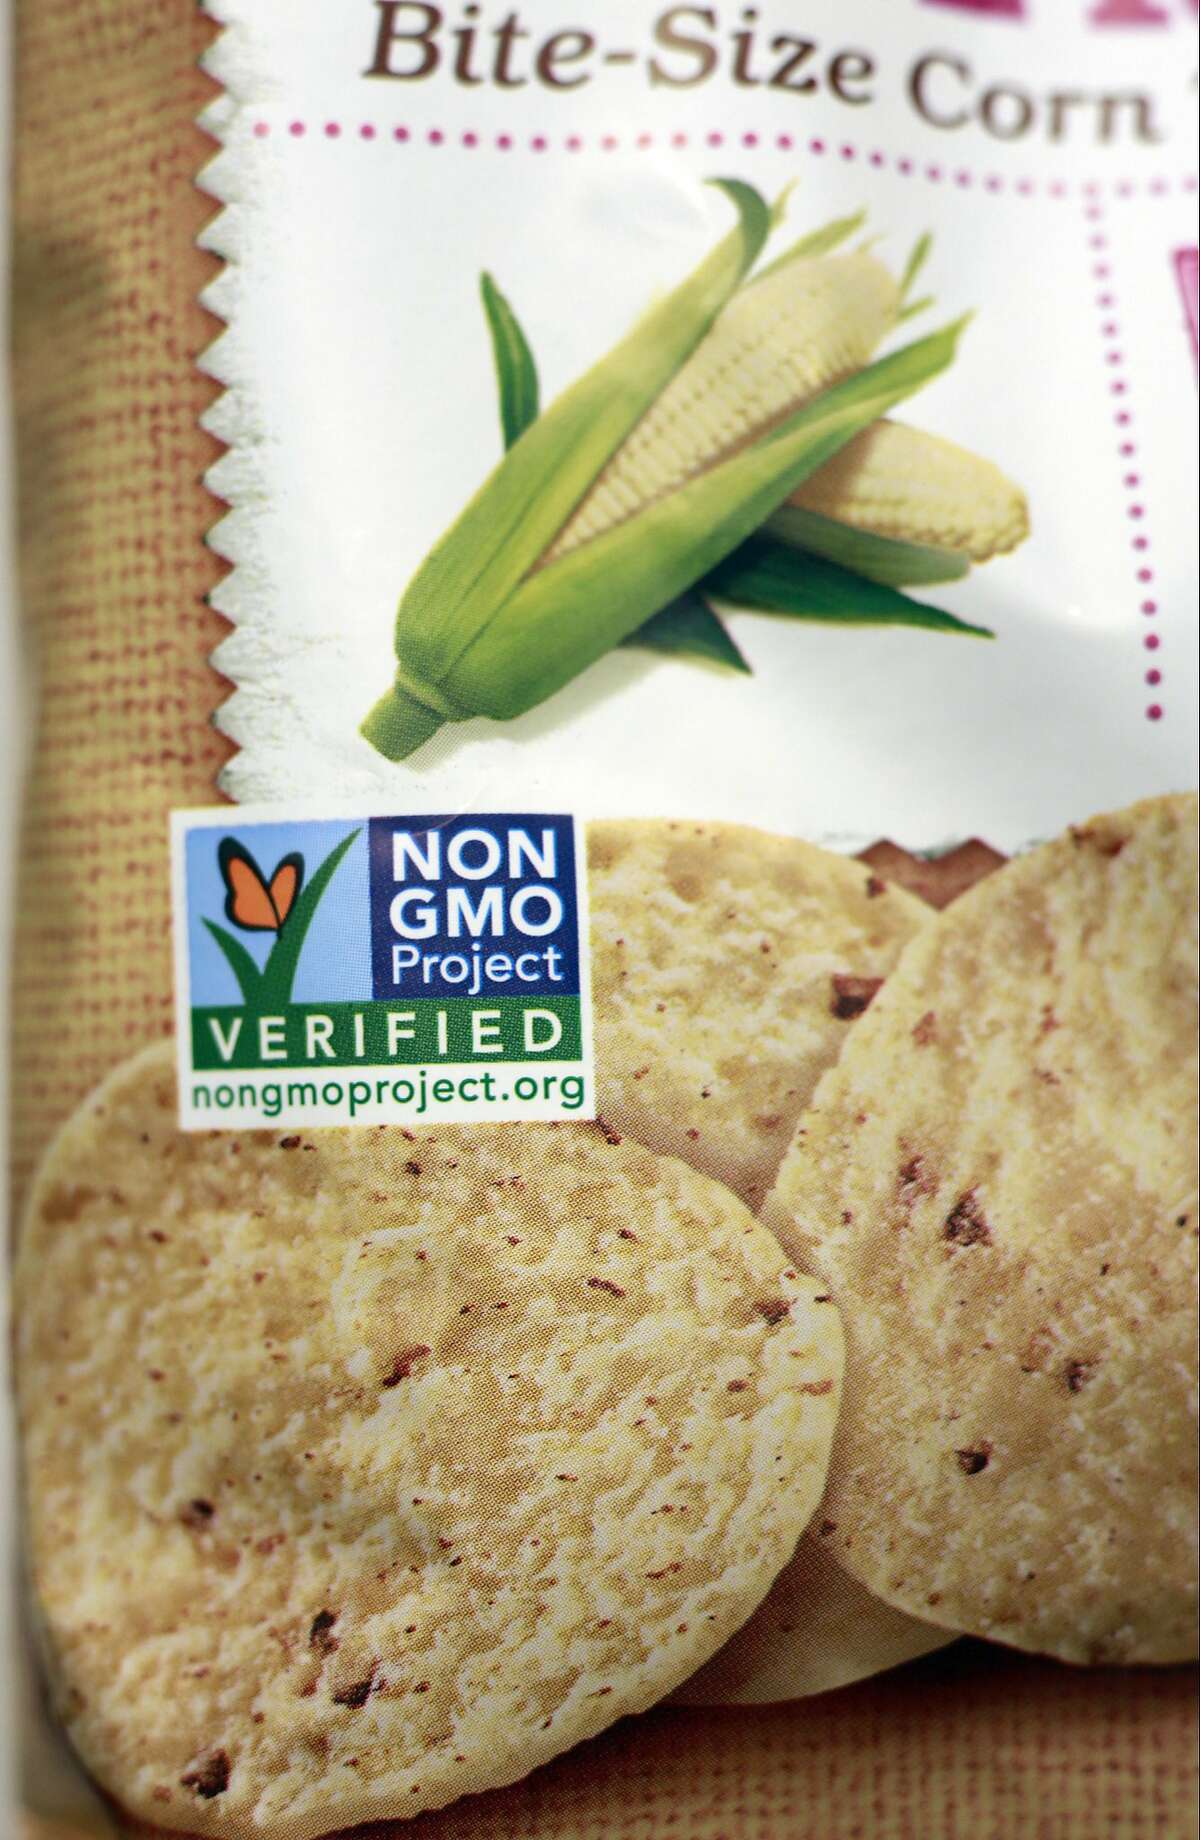 A product labeled with Non Genetically Modified Organism (GMO) is sold at the Lassens Natural Foods & Vitamins store in Los Feliz district of Los Angeles Friday, Oct. 5, 2012. International food and chemical conglomerates are spending millions to defeat California's Proposition 37, which would require labeling on all food made with altered genetic material. It also would prohibit labeling or advertising such food as "natural." (AP Photo/Damian Dovarganes)